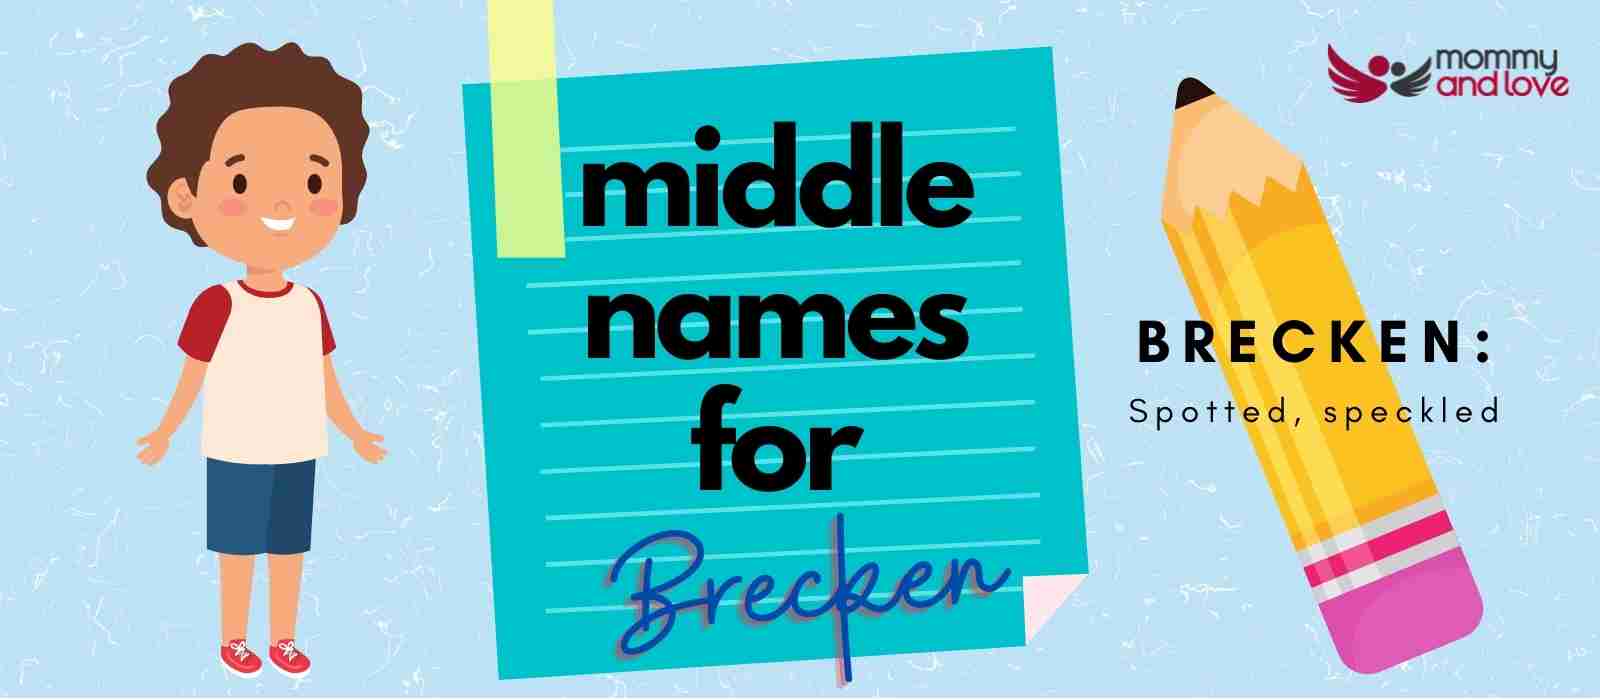 Middle Names for Brecken